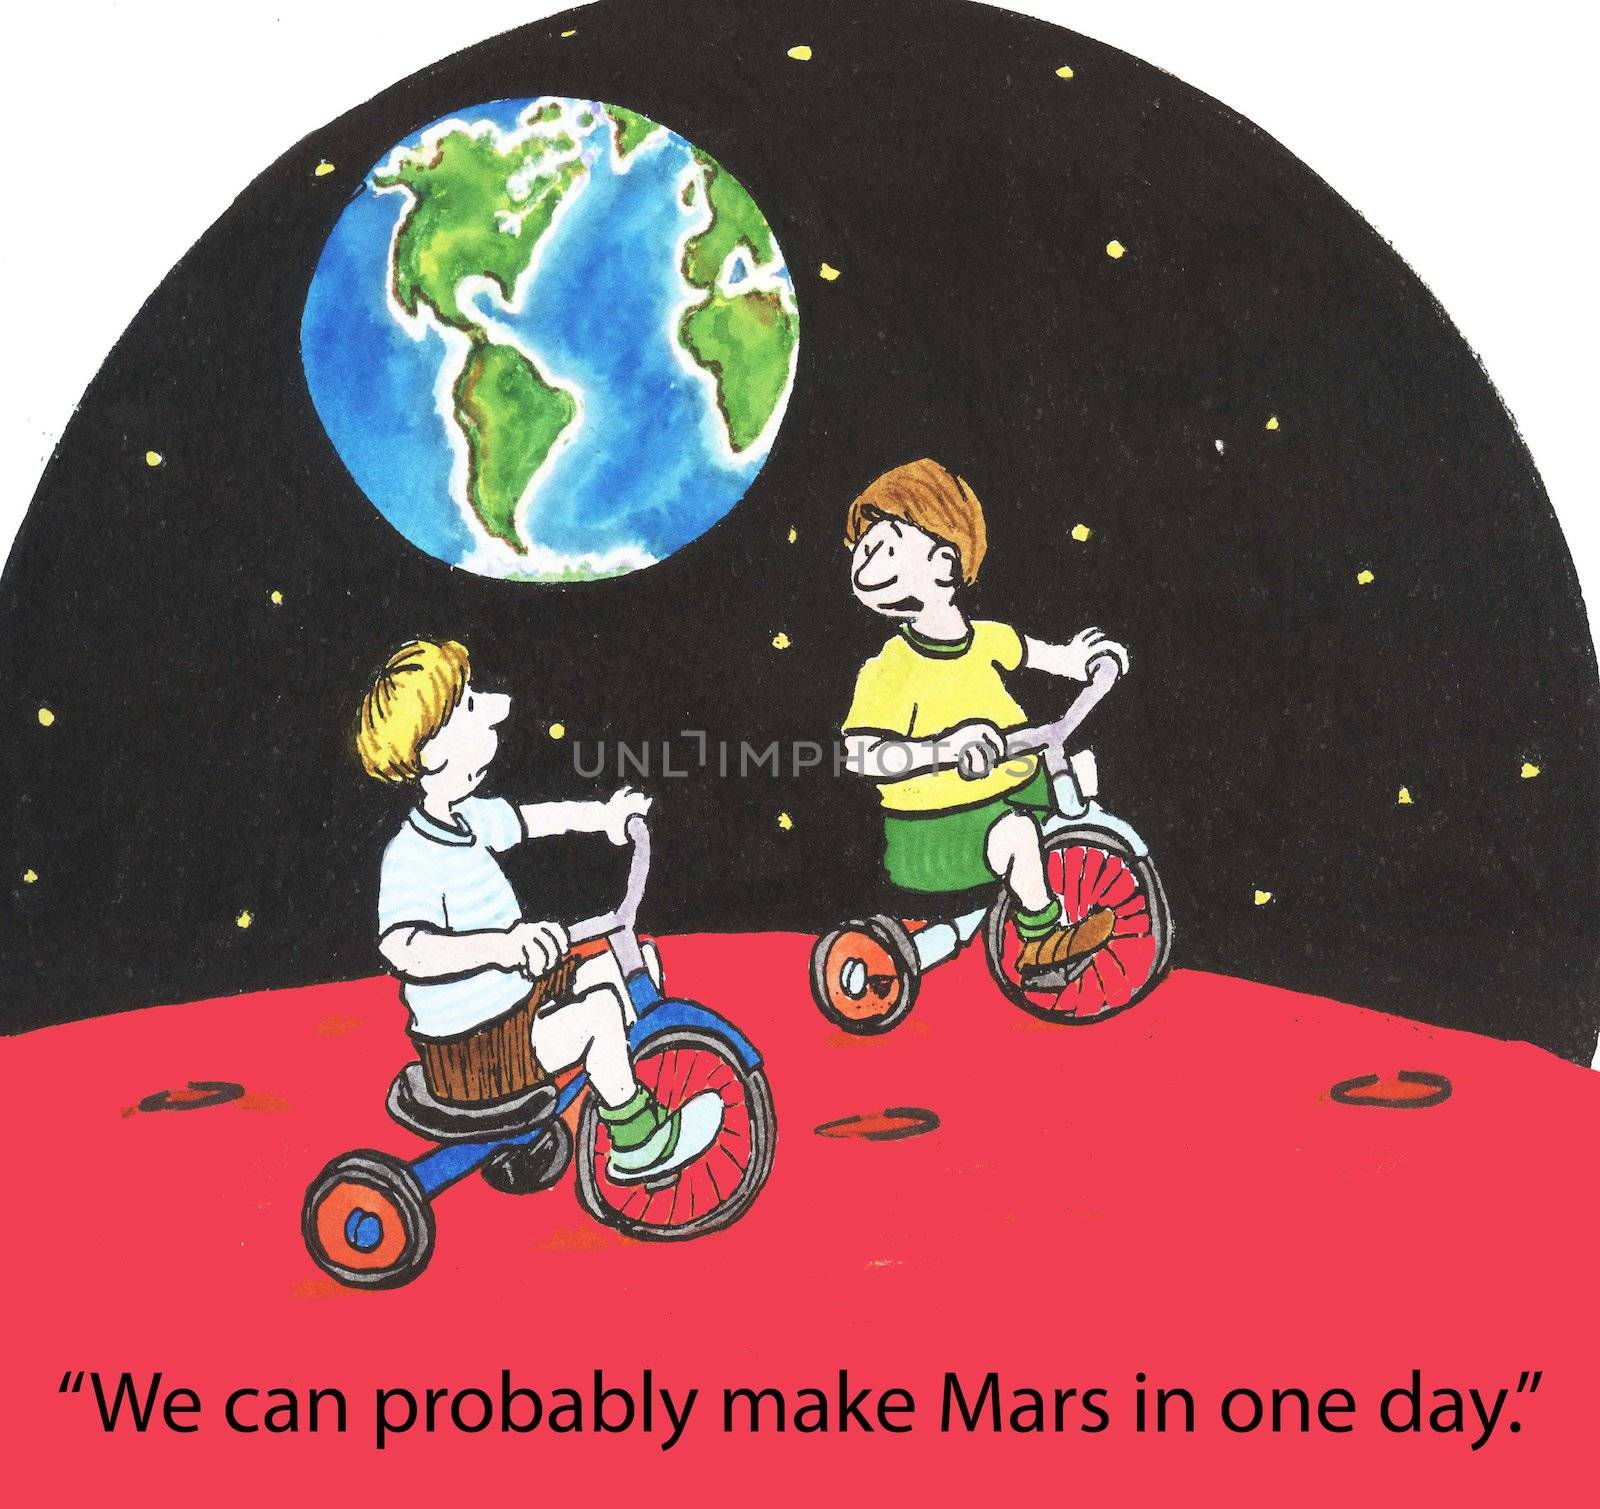 "We can probably make Mars in one day."